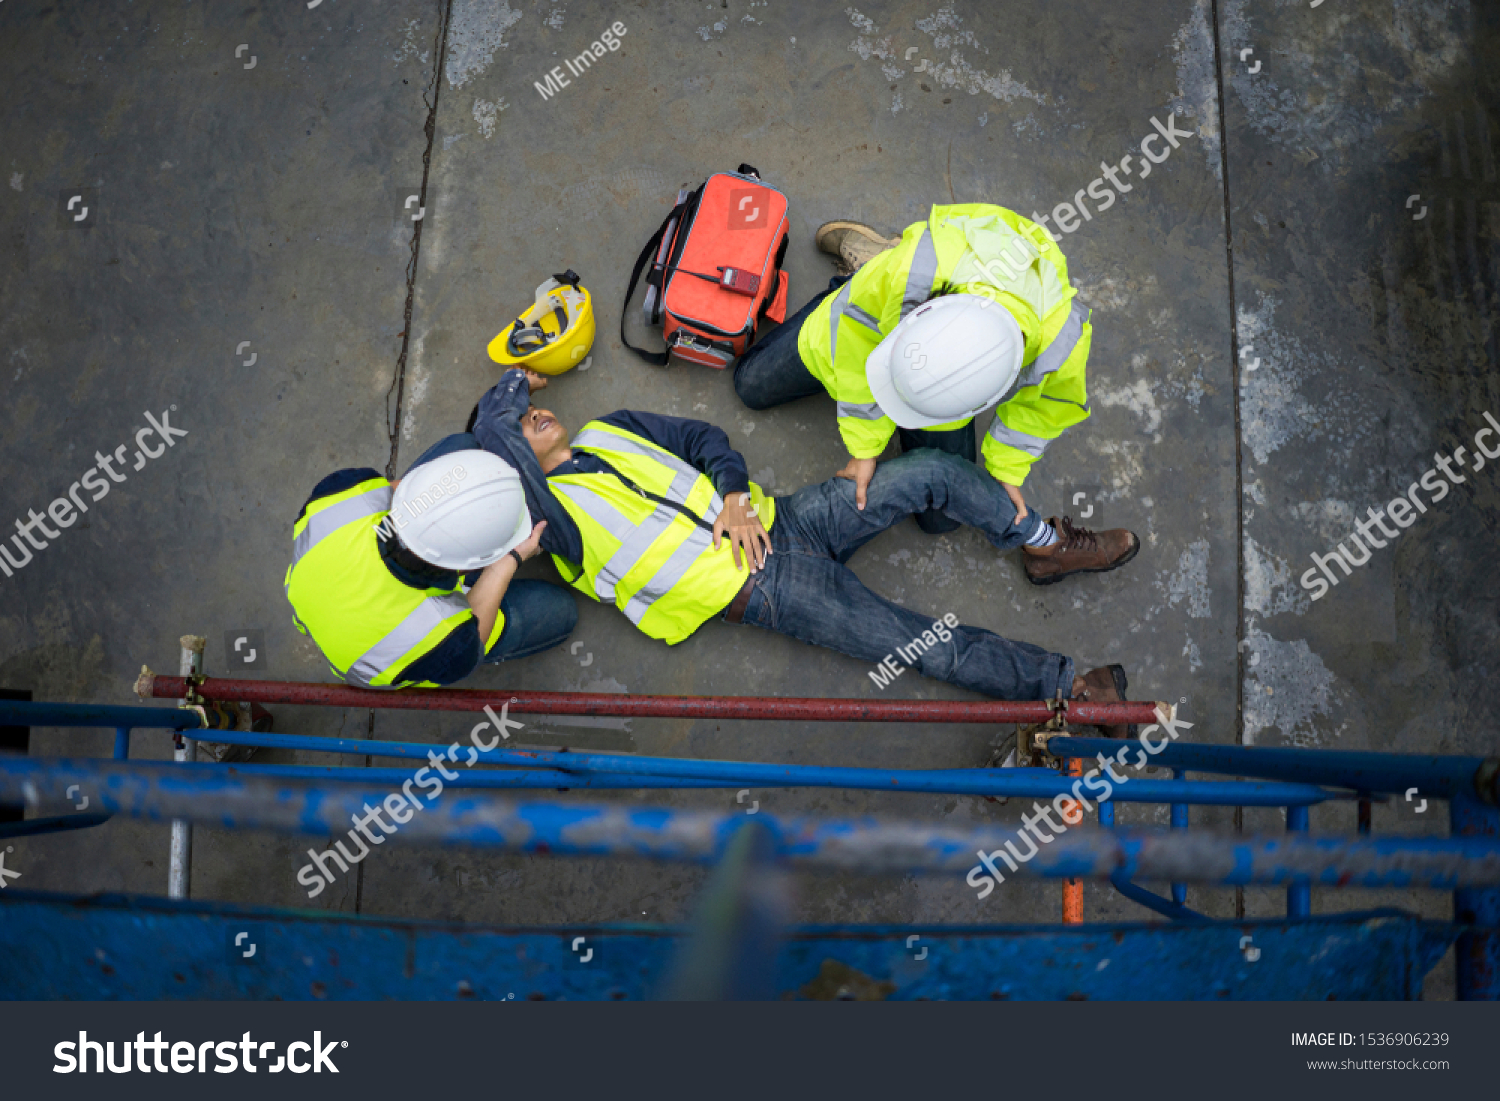 Basic first aid training for support accident in site work, Builder accident fall scaffolding to the floor, Safety team help employee accident. #1536906239